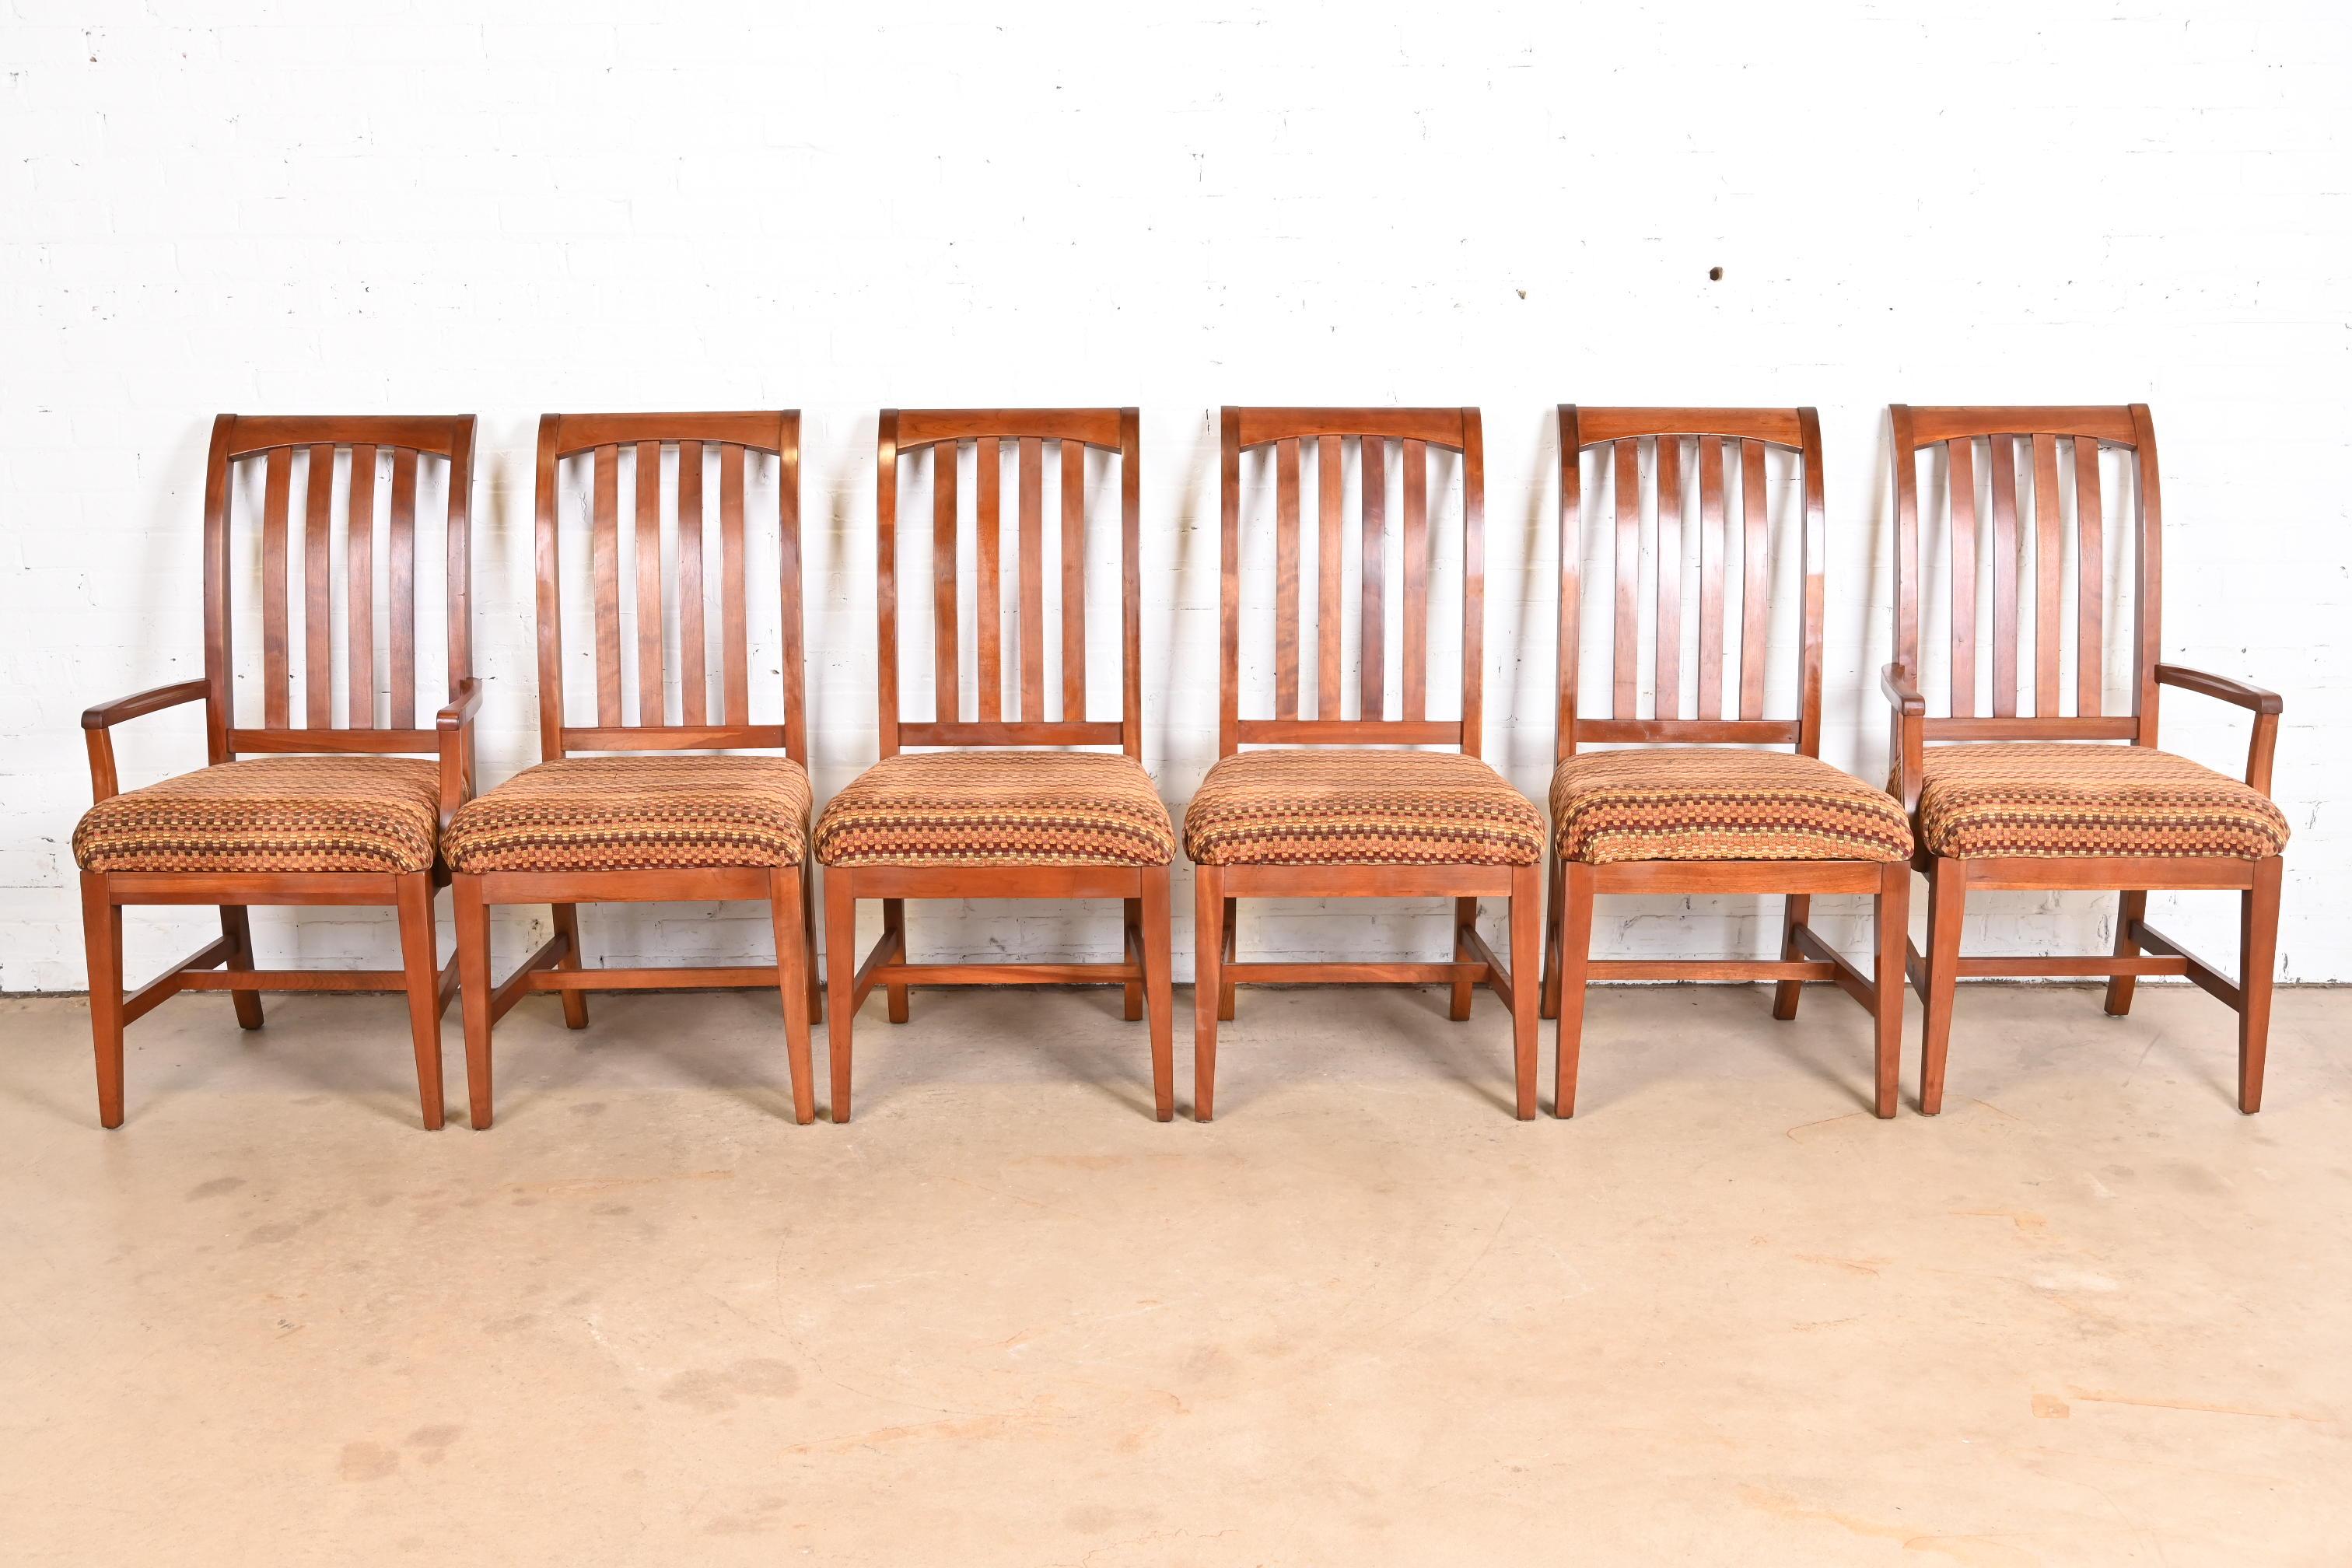 A gorgeous set of six Arts & Crafts or Shaker style dining chairs

USA, Late 20th Century

Carved solid cherry wood, with upholstered seats.

Measures:
Side chairs - 21.5